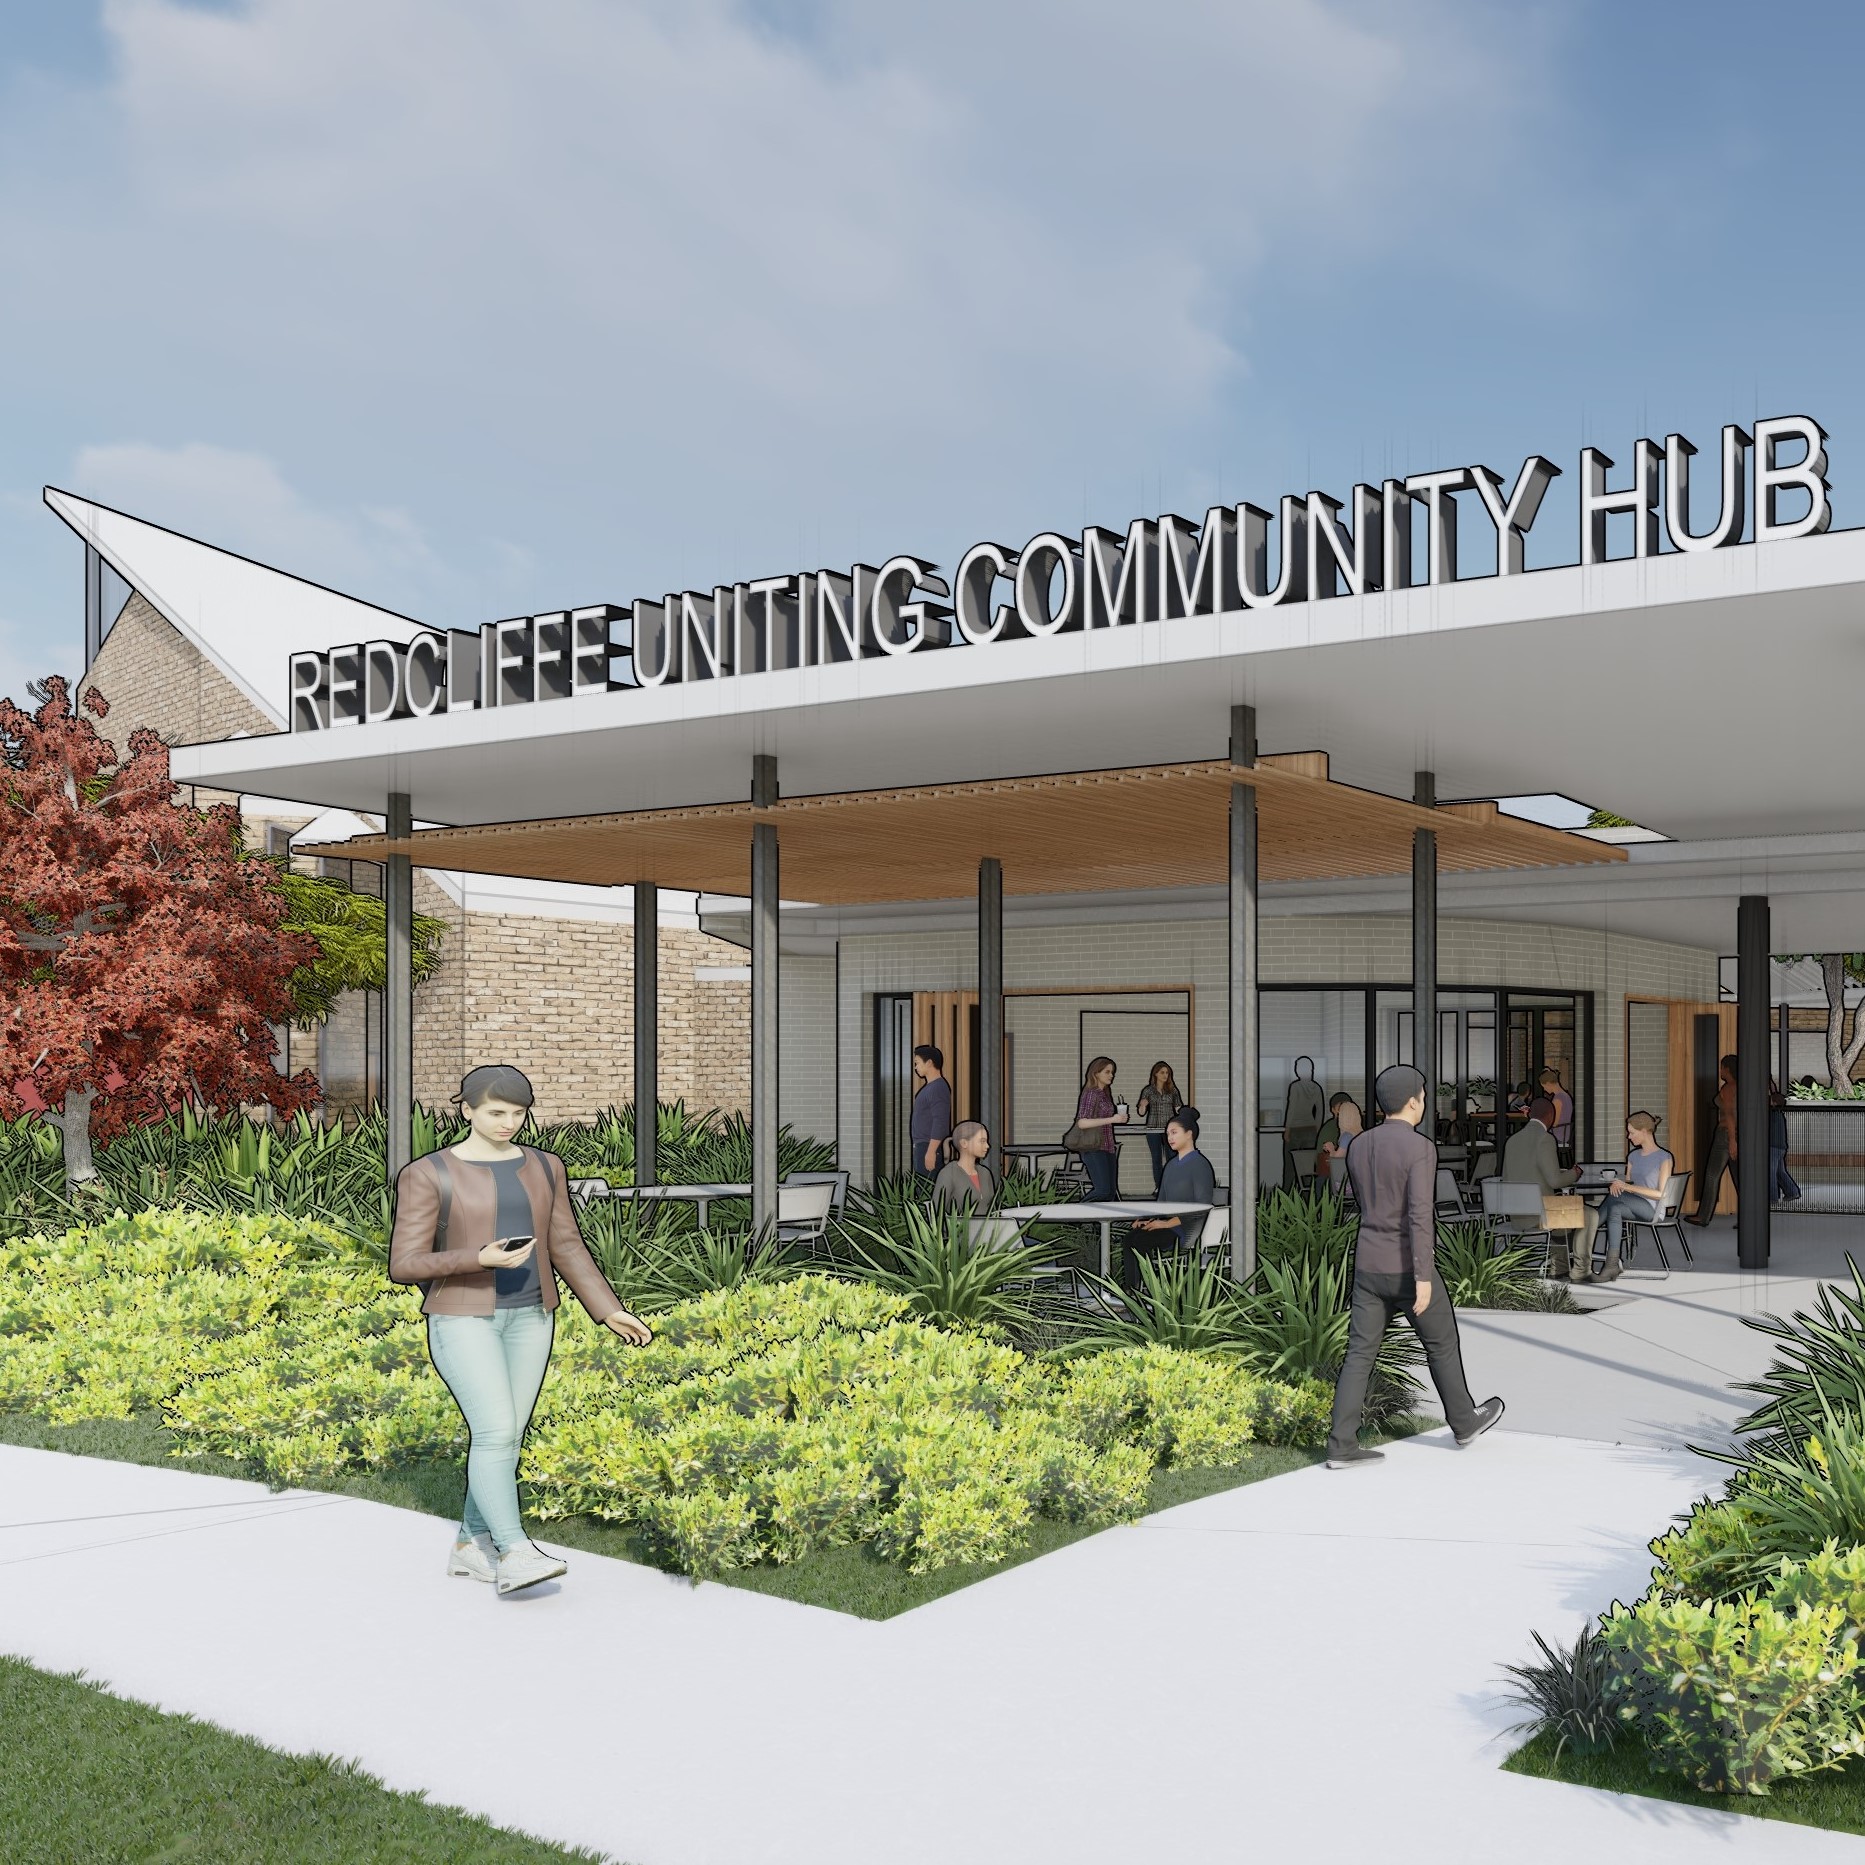 A Community Hub for Redcliffe